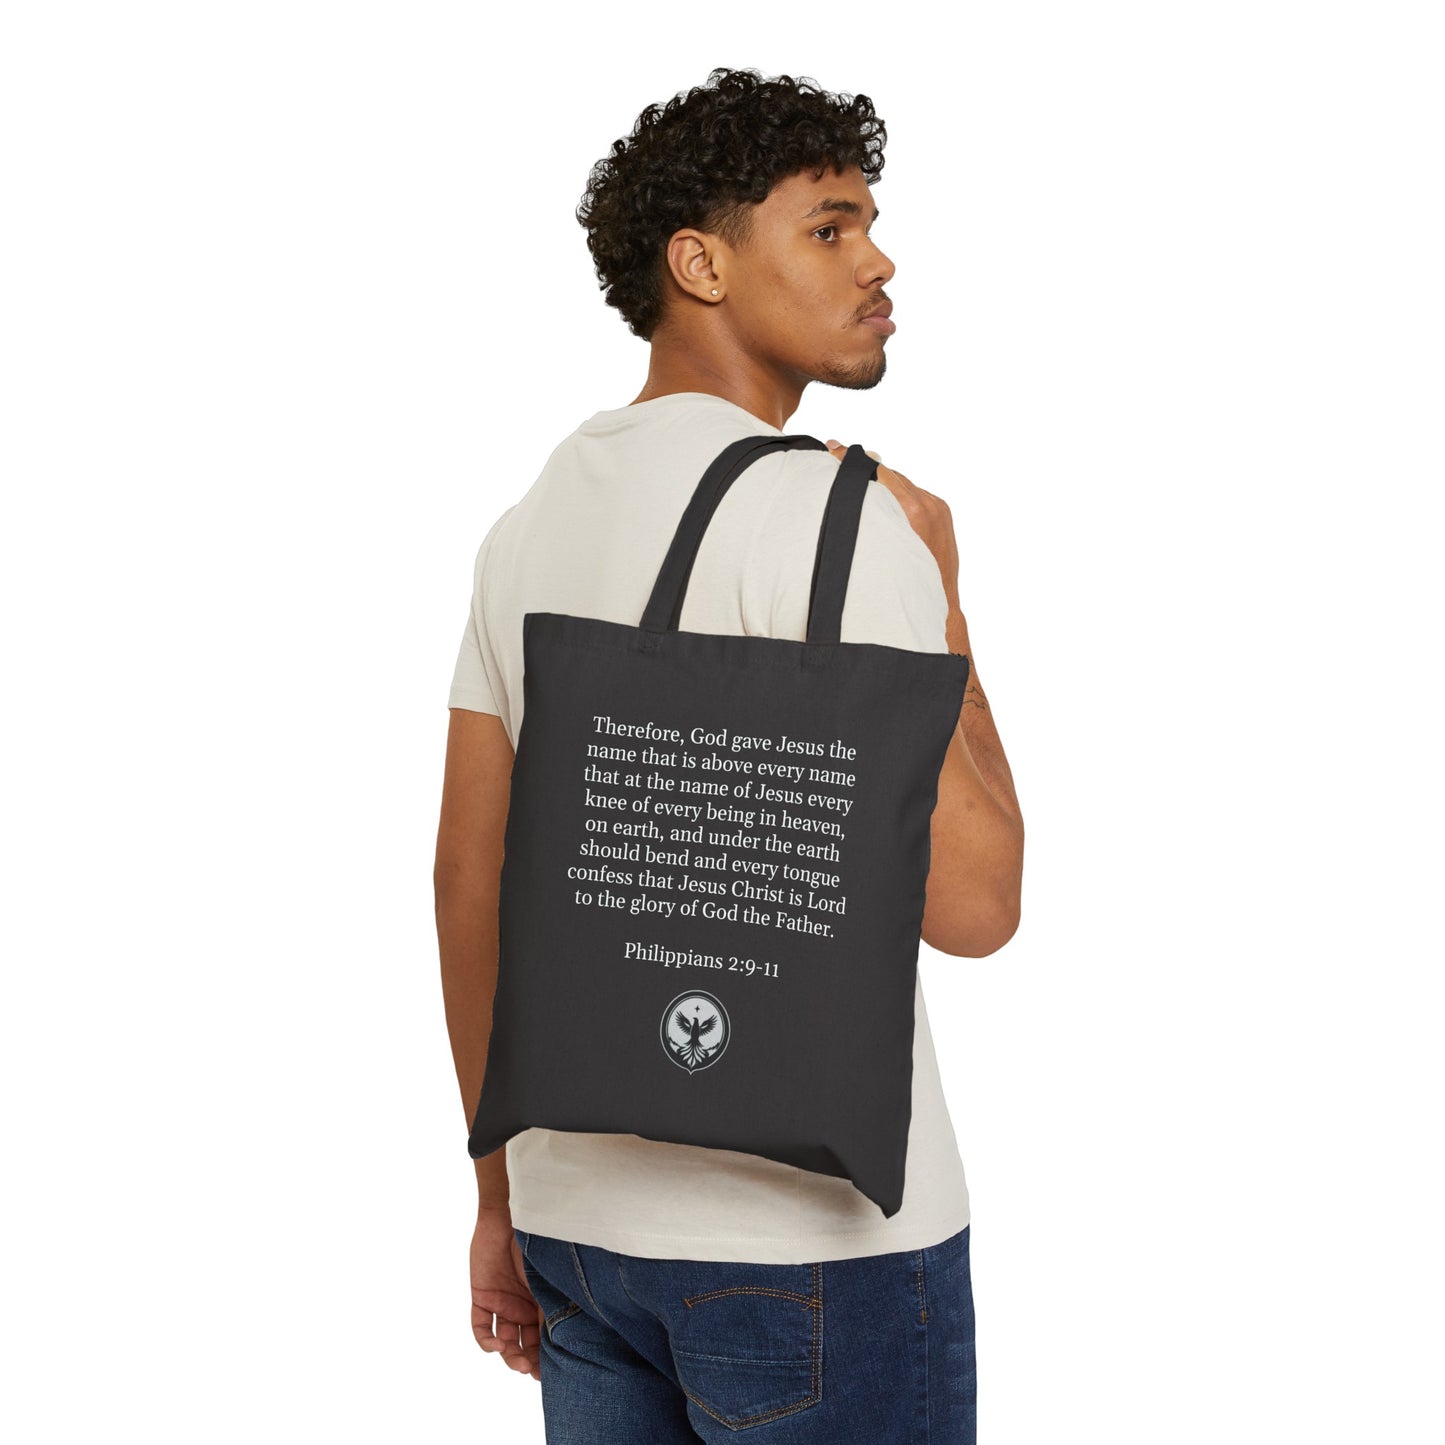 "Jesus Christ is Lord" Cotton Canvas Tote Bag